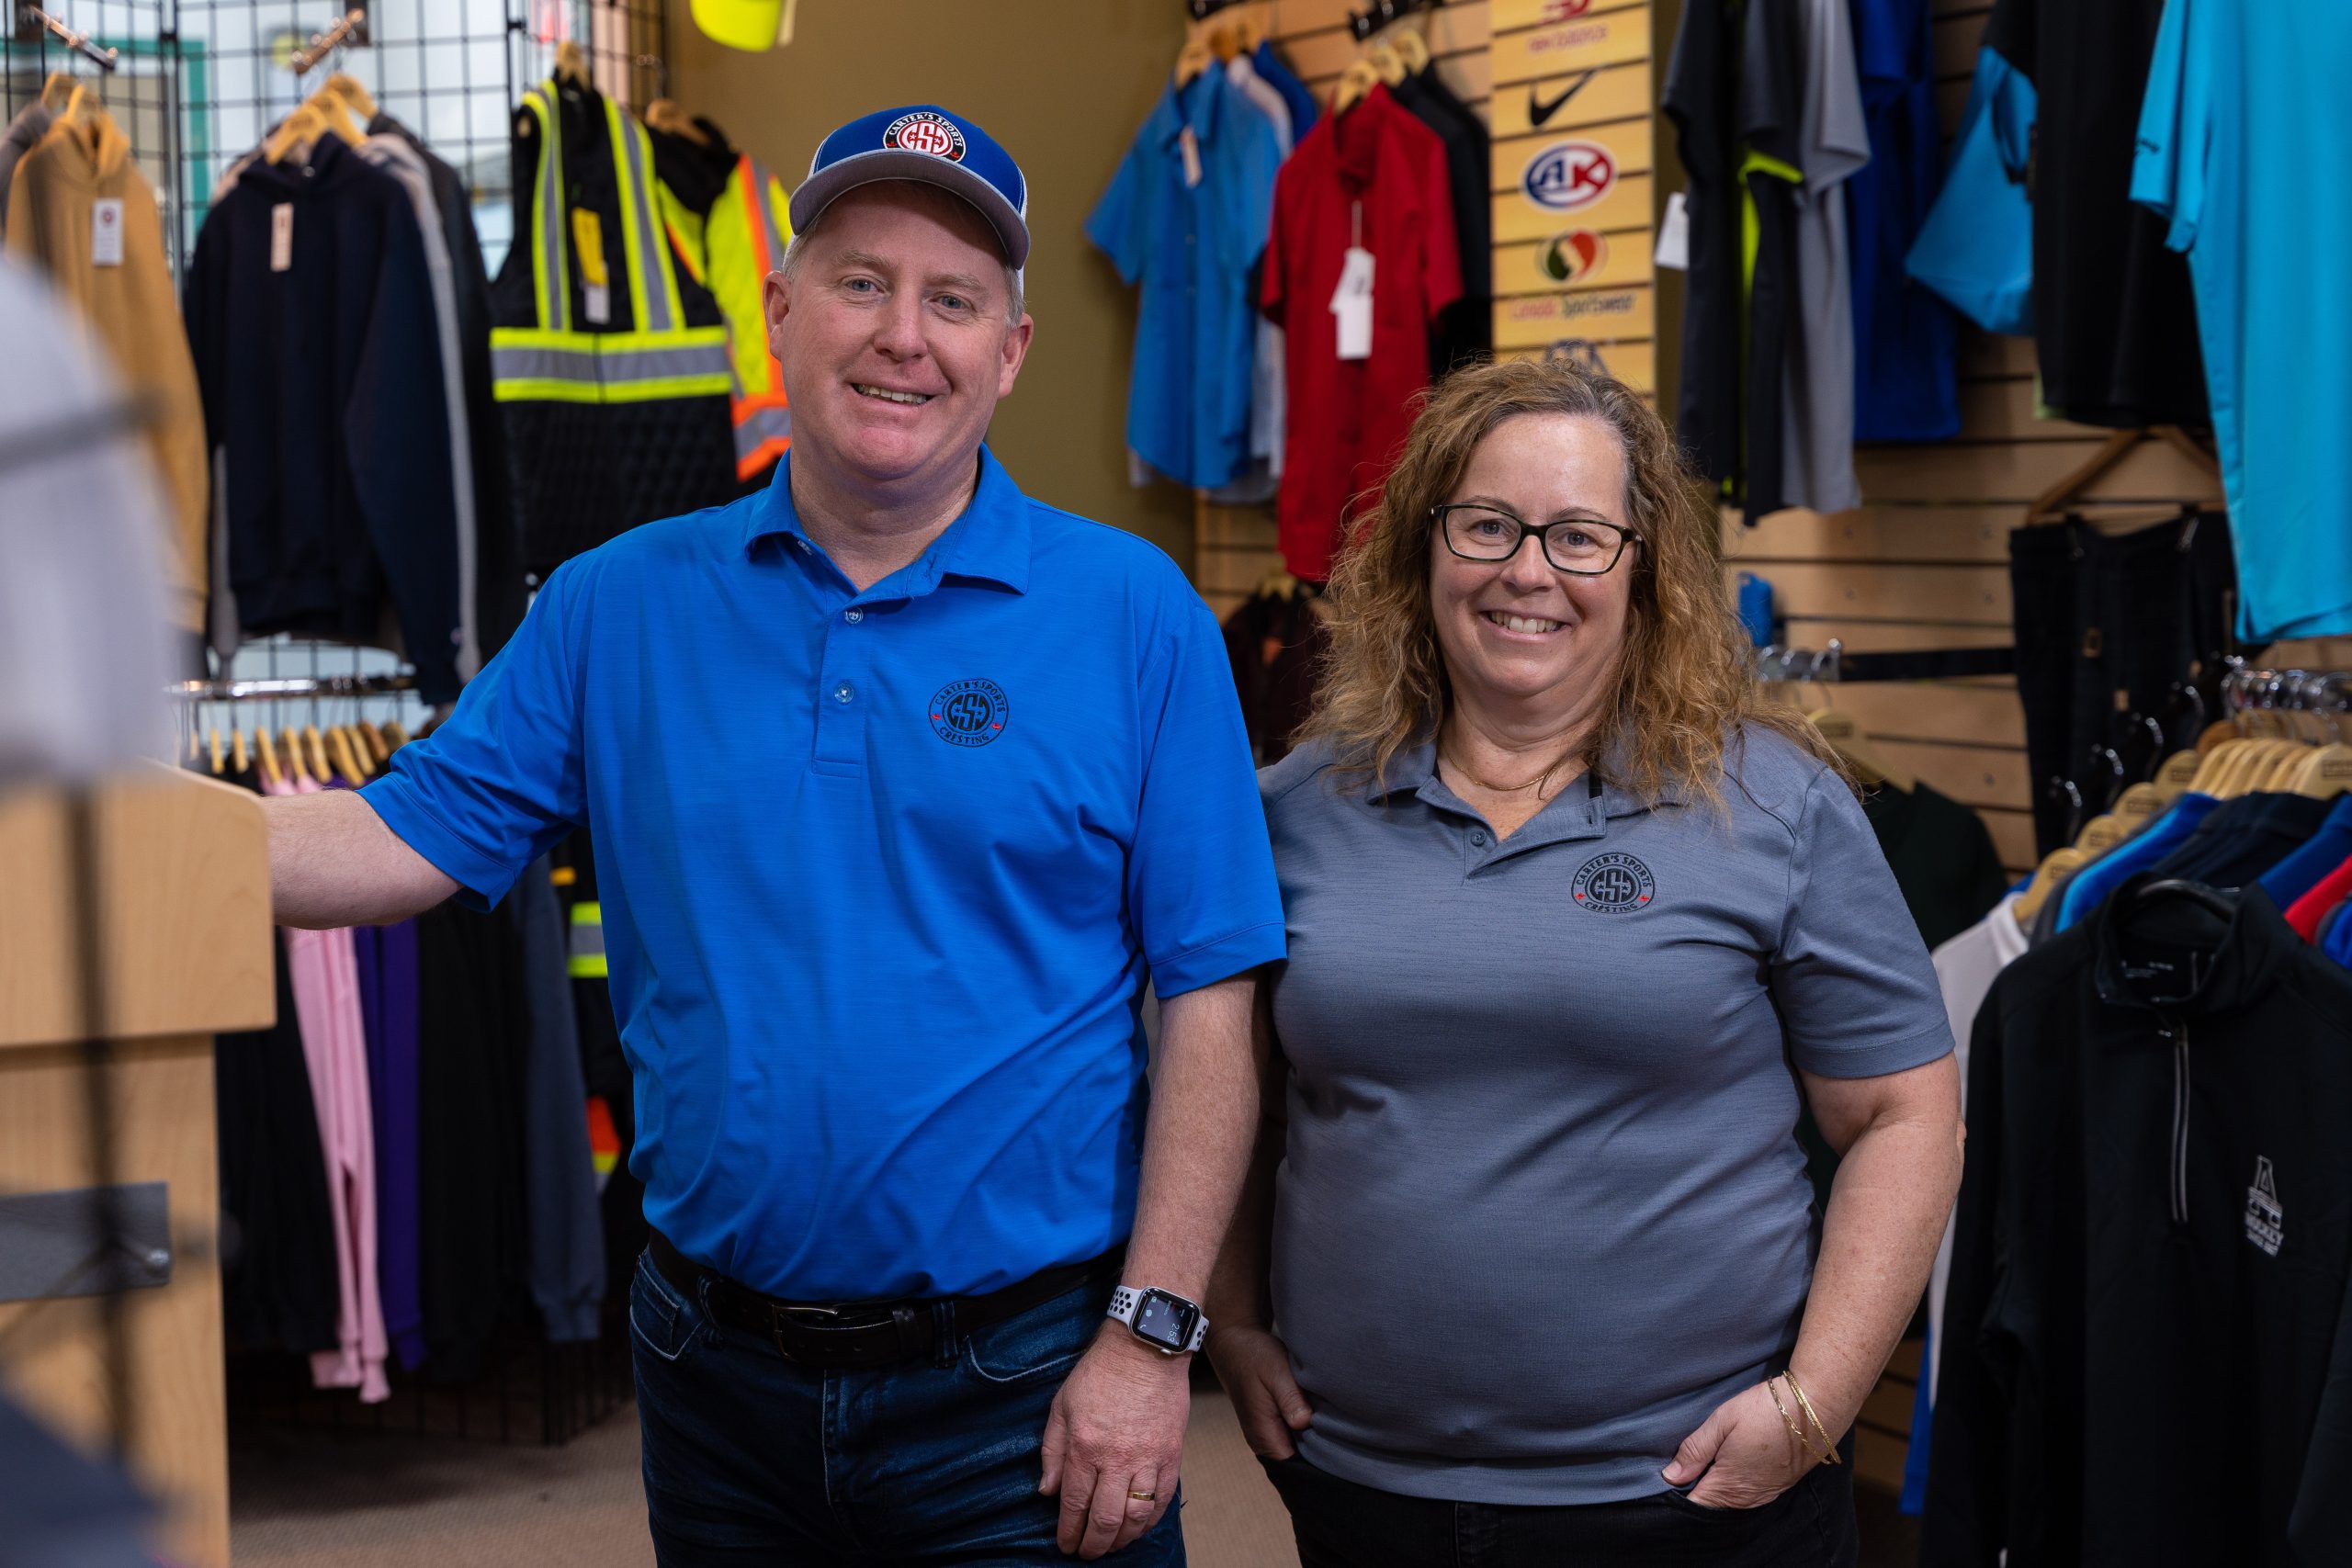 CARTER’S CELEBRATES 23 YEARS DOING BUSINESS IN CUMBERLAND